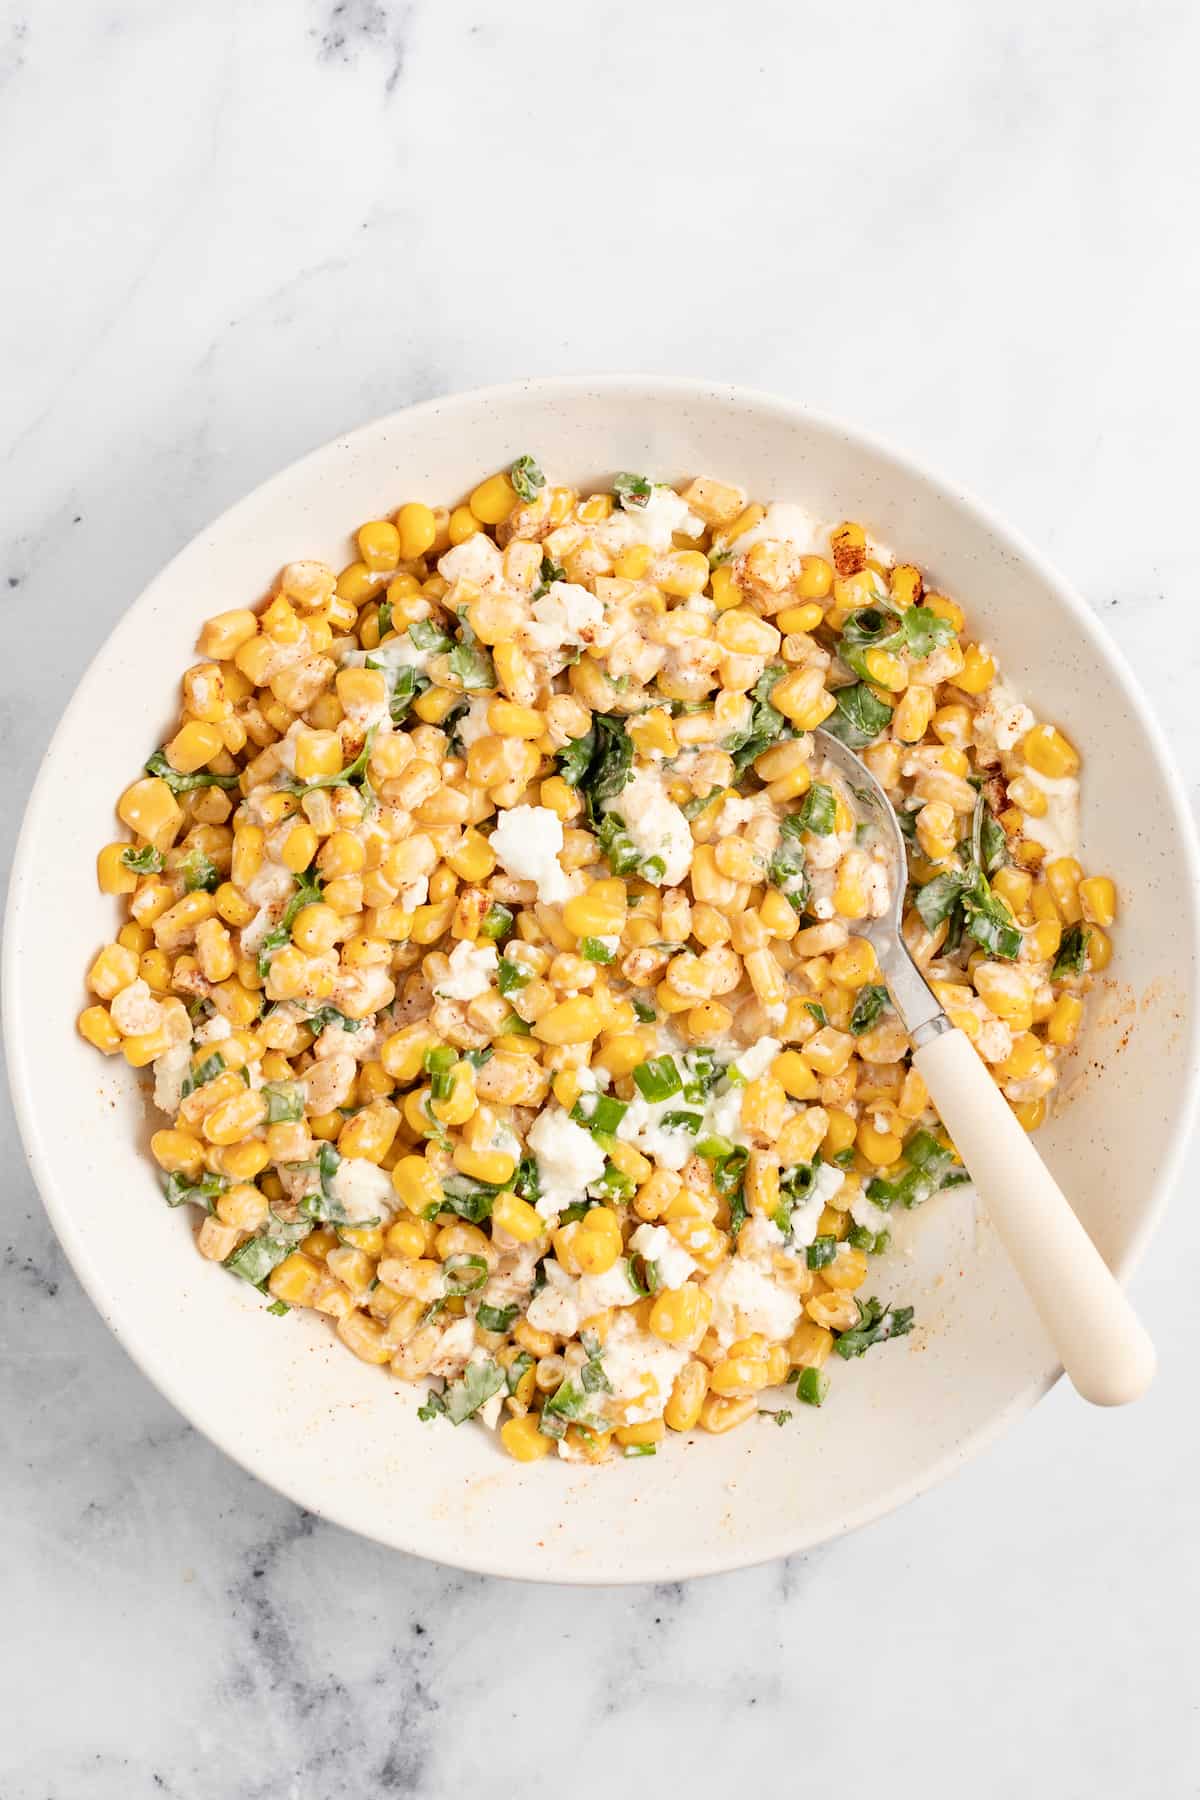 Mexican Street Corn Salad in a bowl which is made of corn, herbs, spices, and a creamy dressing